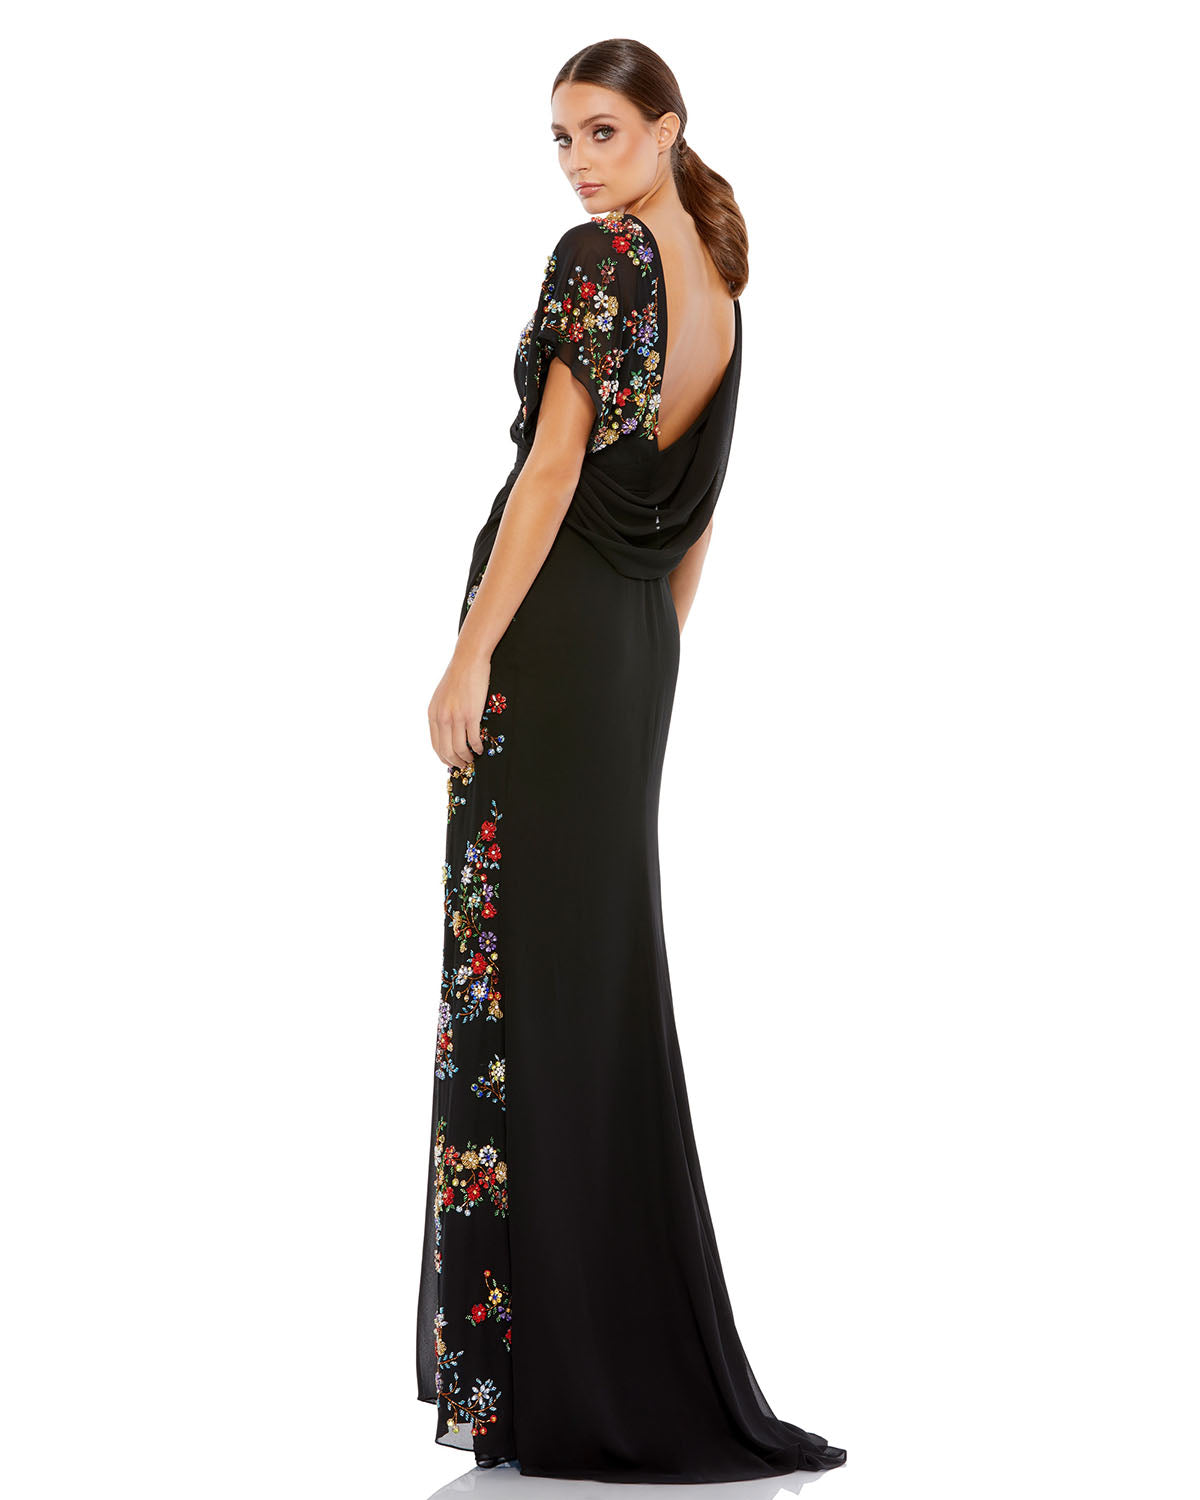 Faux Wrap Multi Colored Beaded Floral Gown